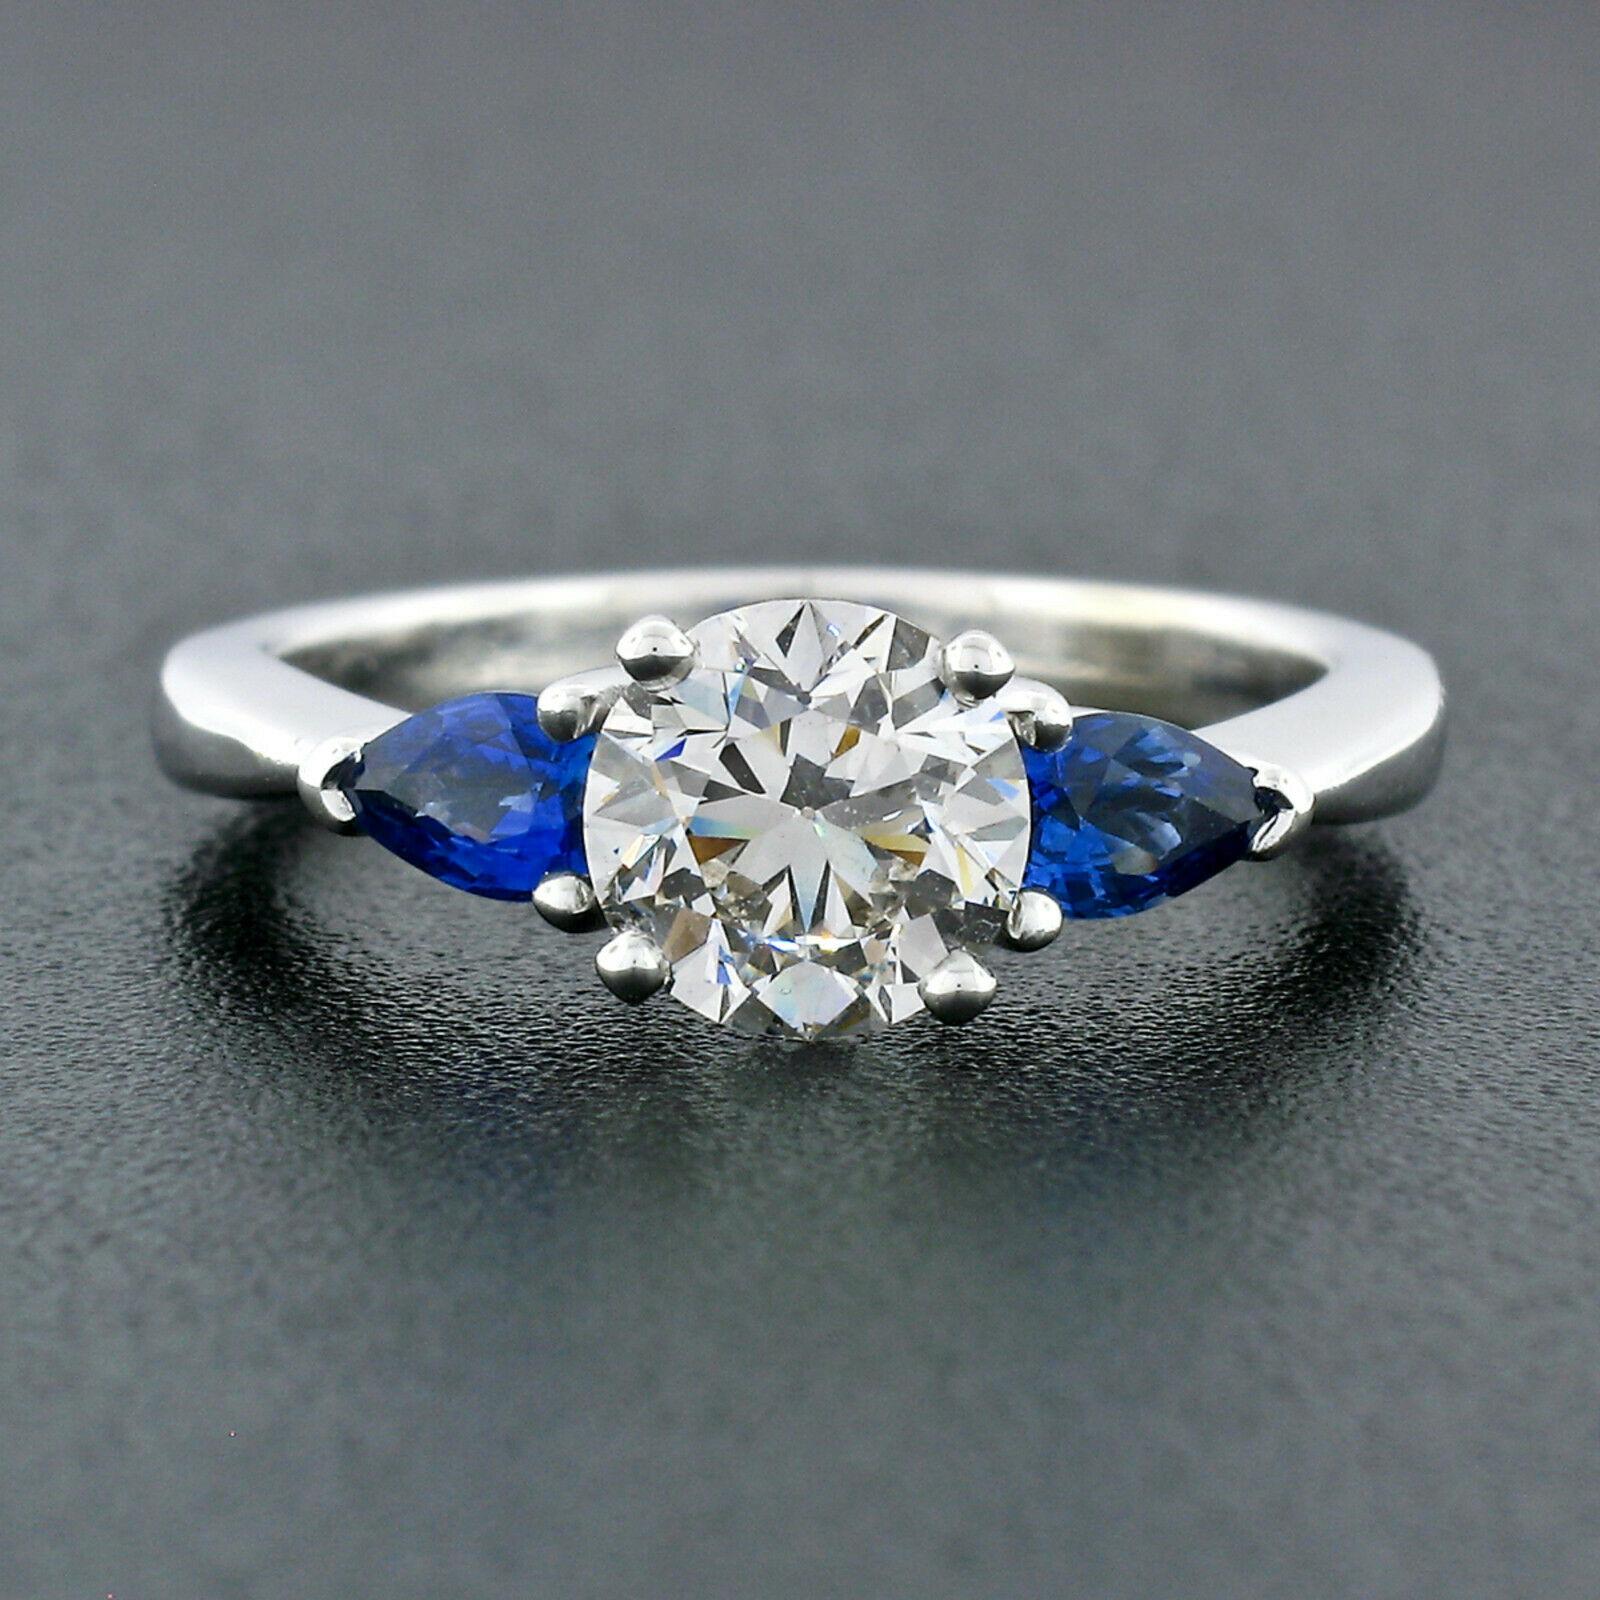 You are looking at a magnificent diamond and sapphire three-stone engagement ring that is newly crafted from solid 14k white gold. This ring features a stunning, GIA certified, round brilliant diamond solitaire prong set at its center. The diamond